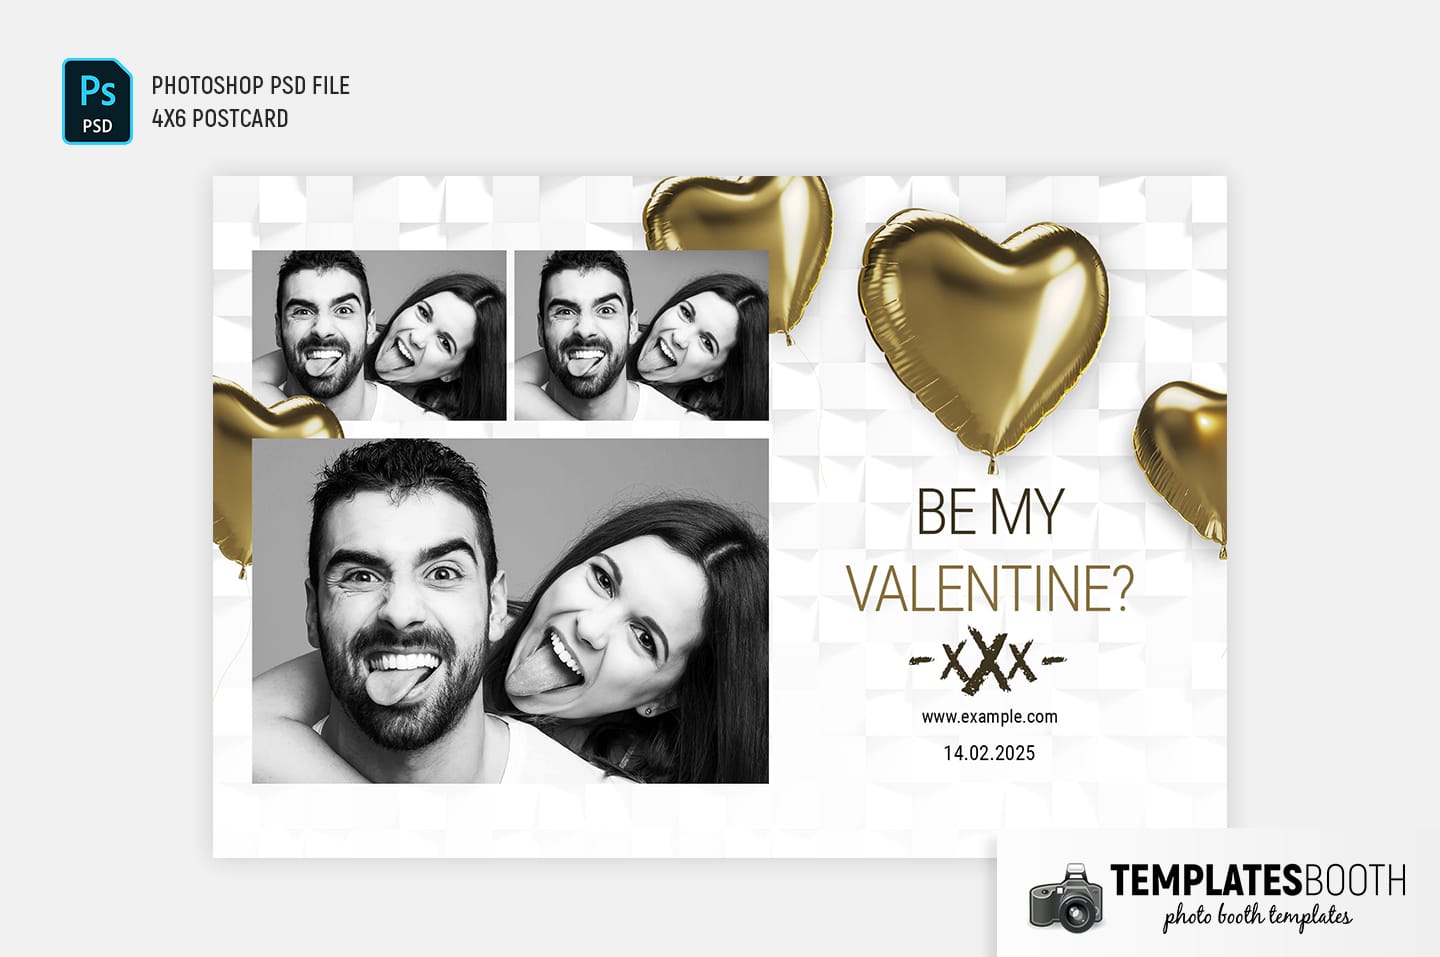 Be My Valentine Photo Booth Template (4x6 landscape)